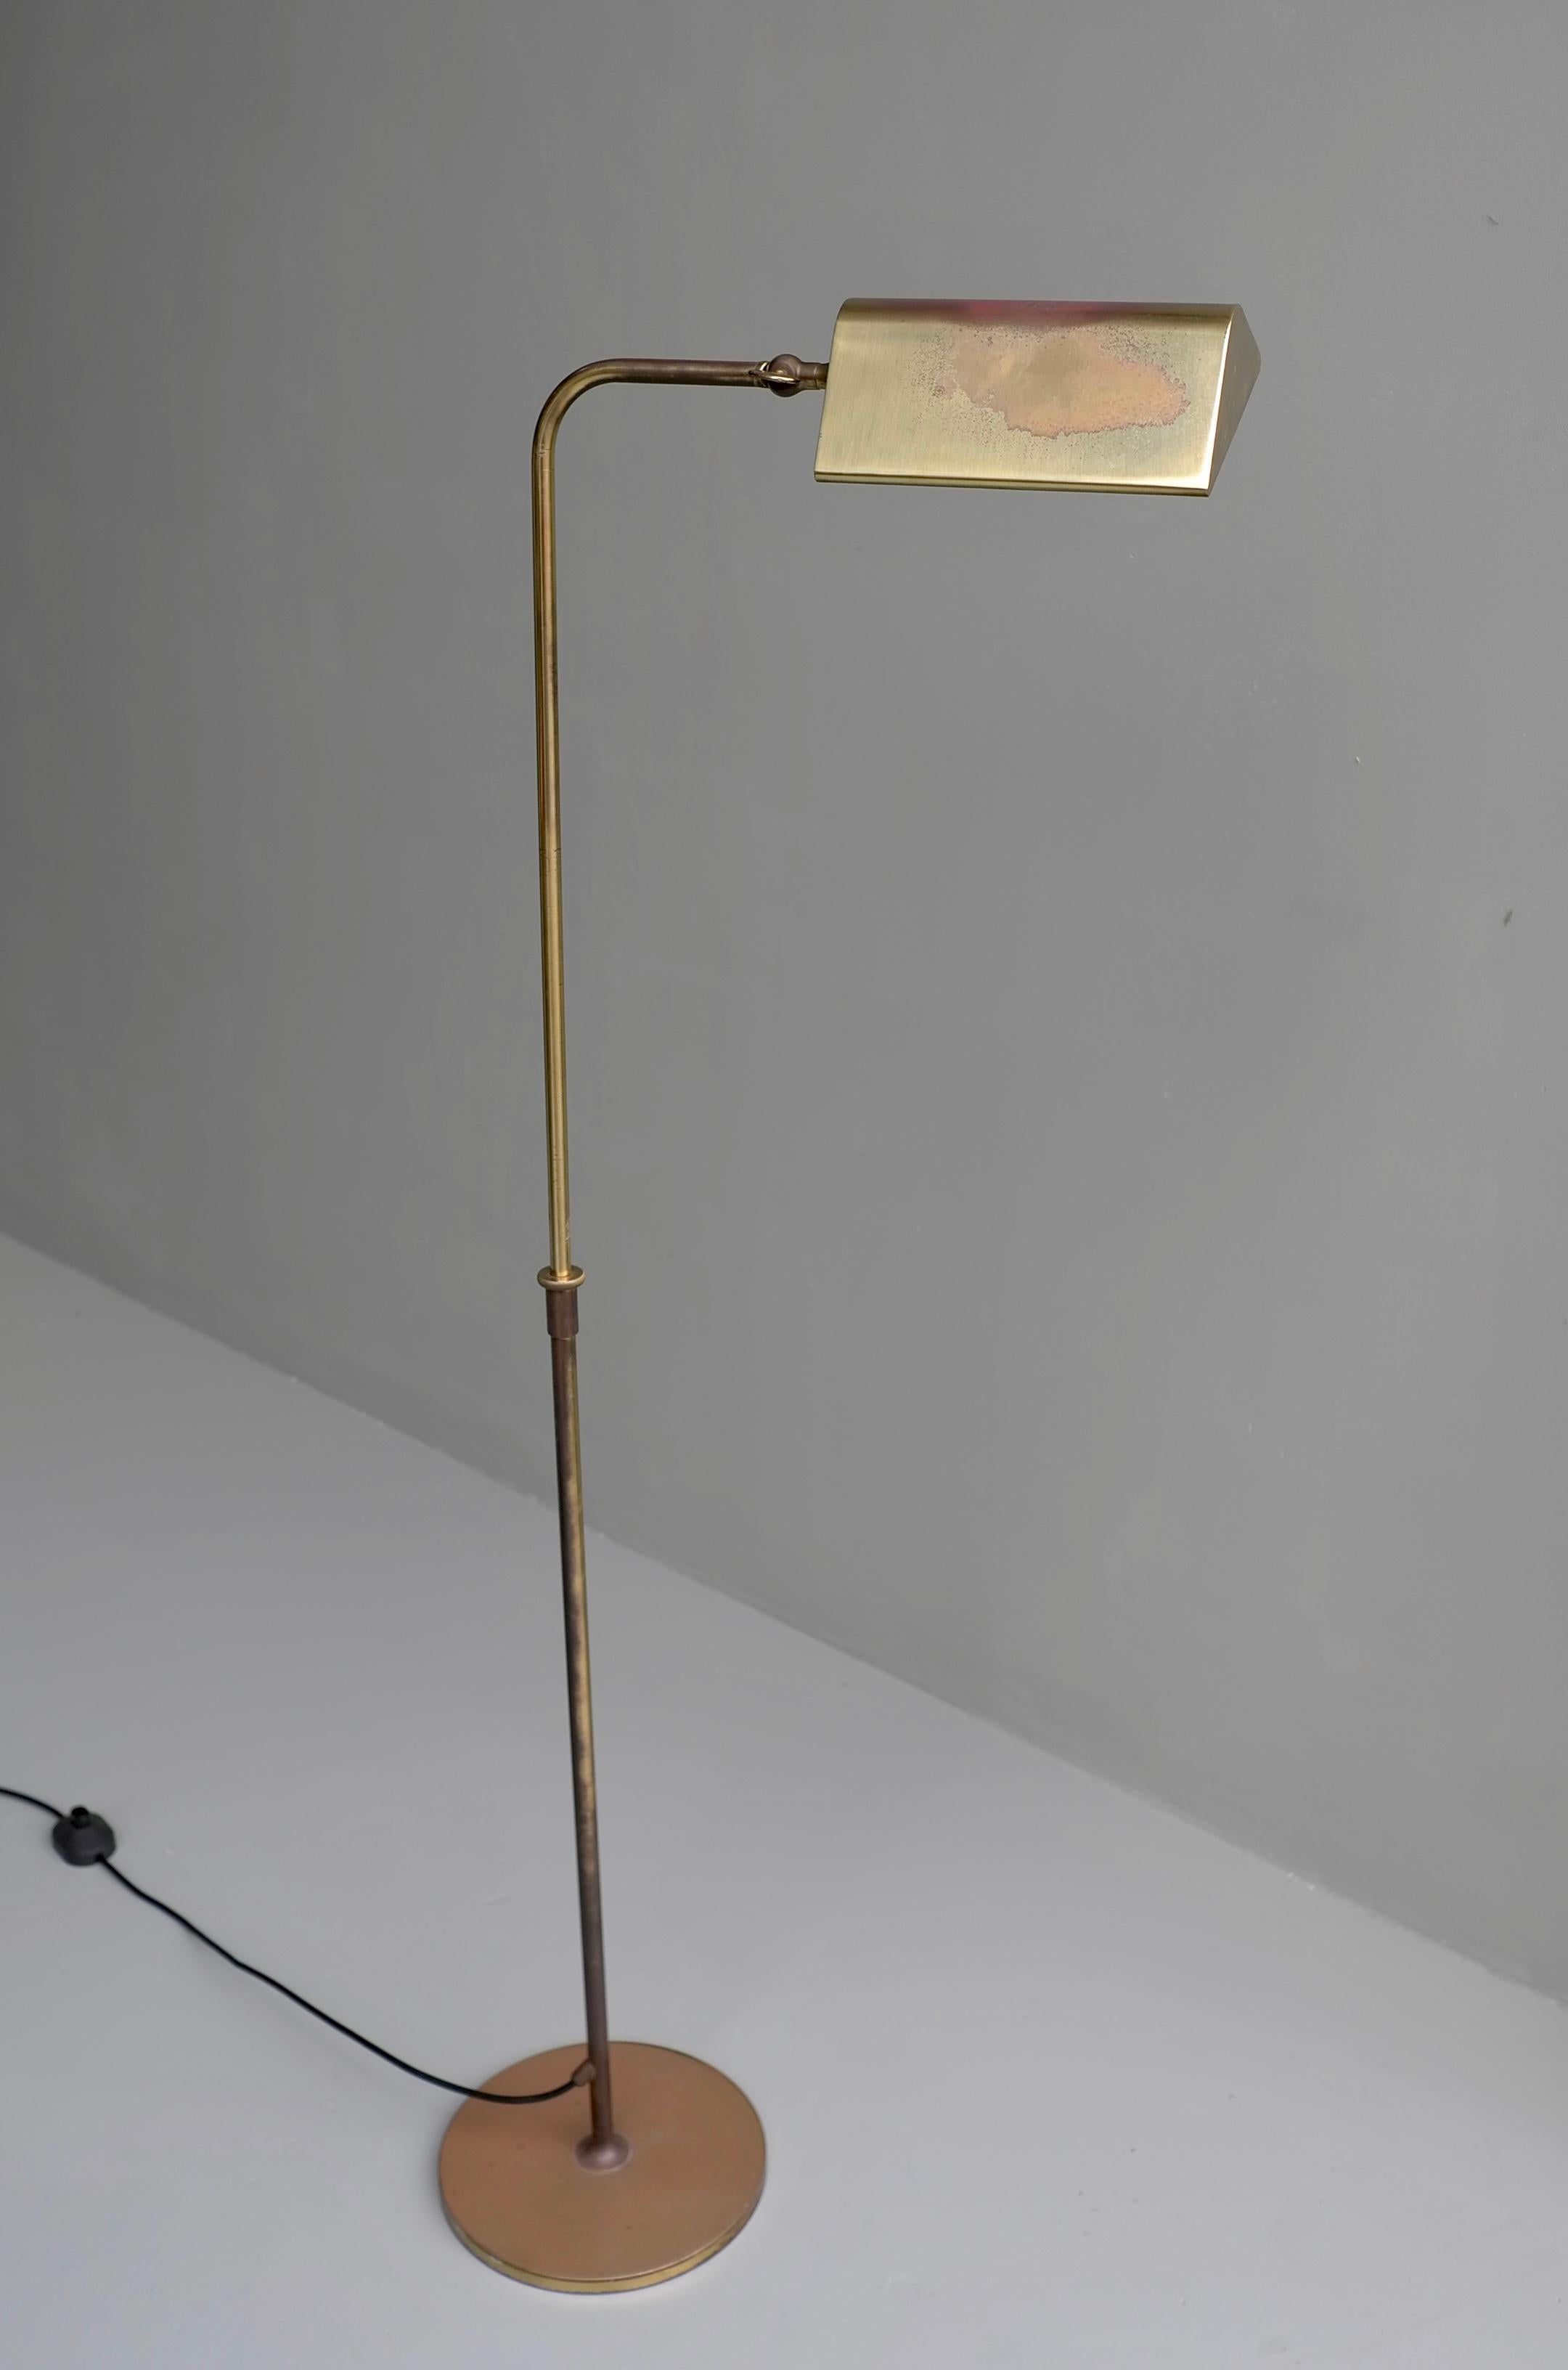 Florian Schulz Adjustable Copper and Brass Library Floor Lamp with Patina In Good Condition For Sale In Den Haag, NL